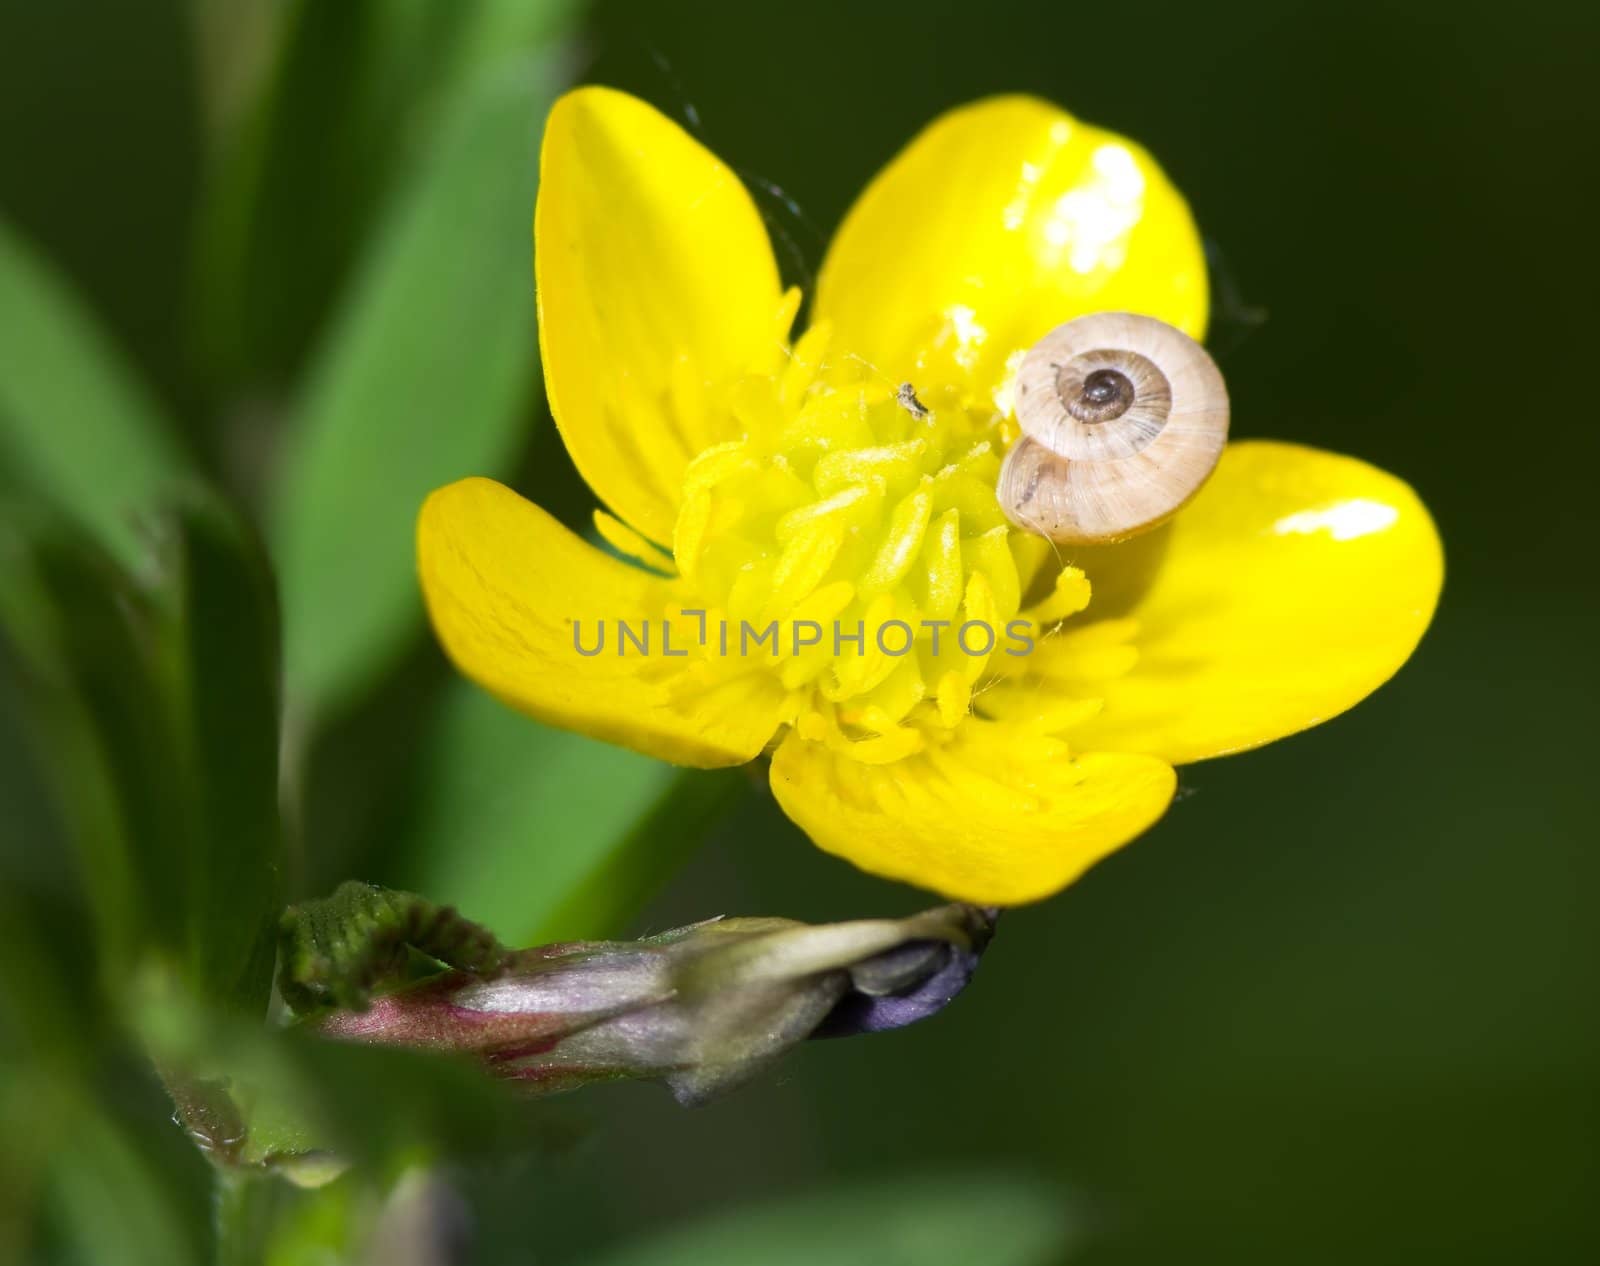 Snail on flower of buttercup by baggiovara